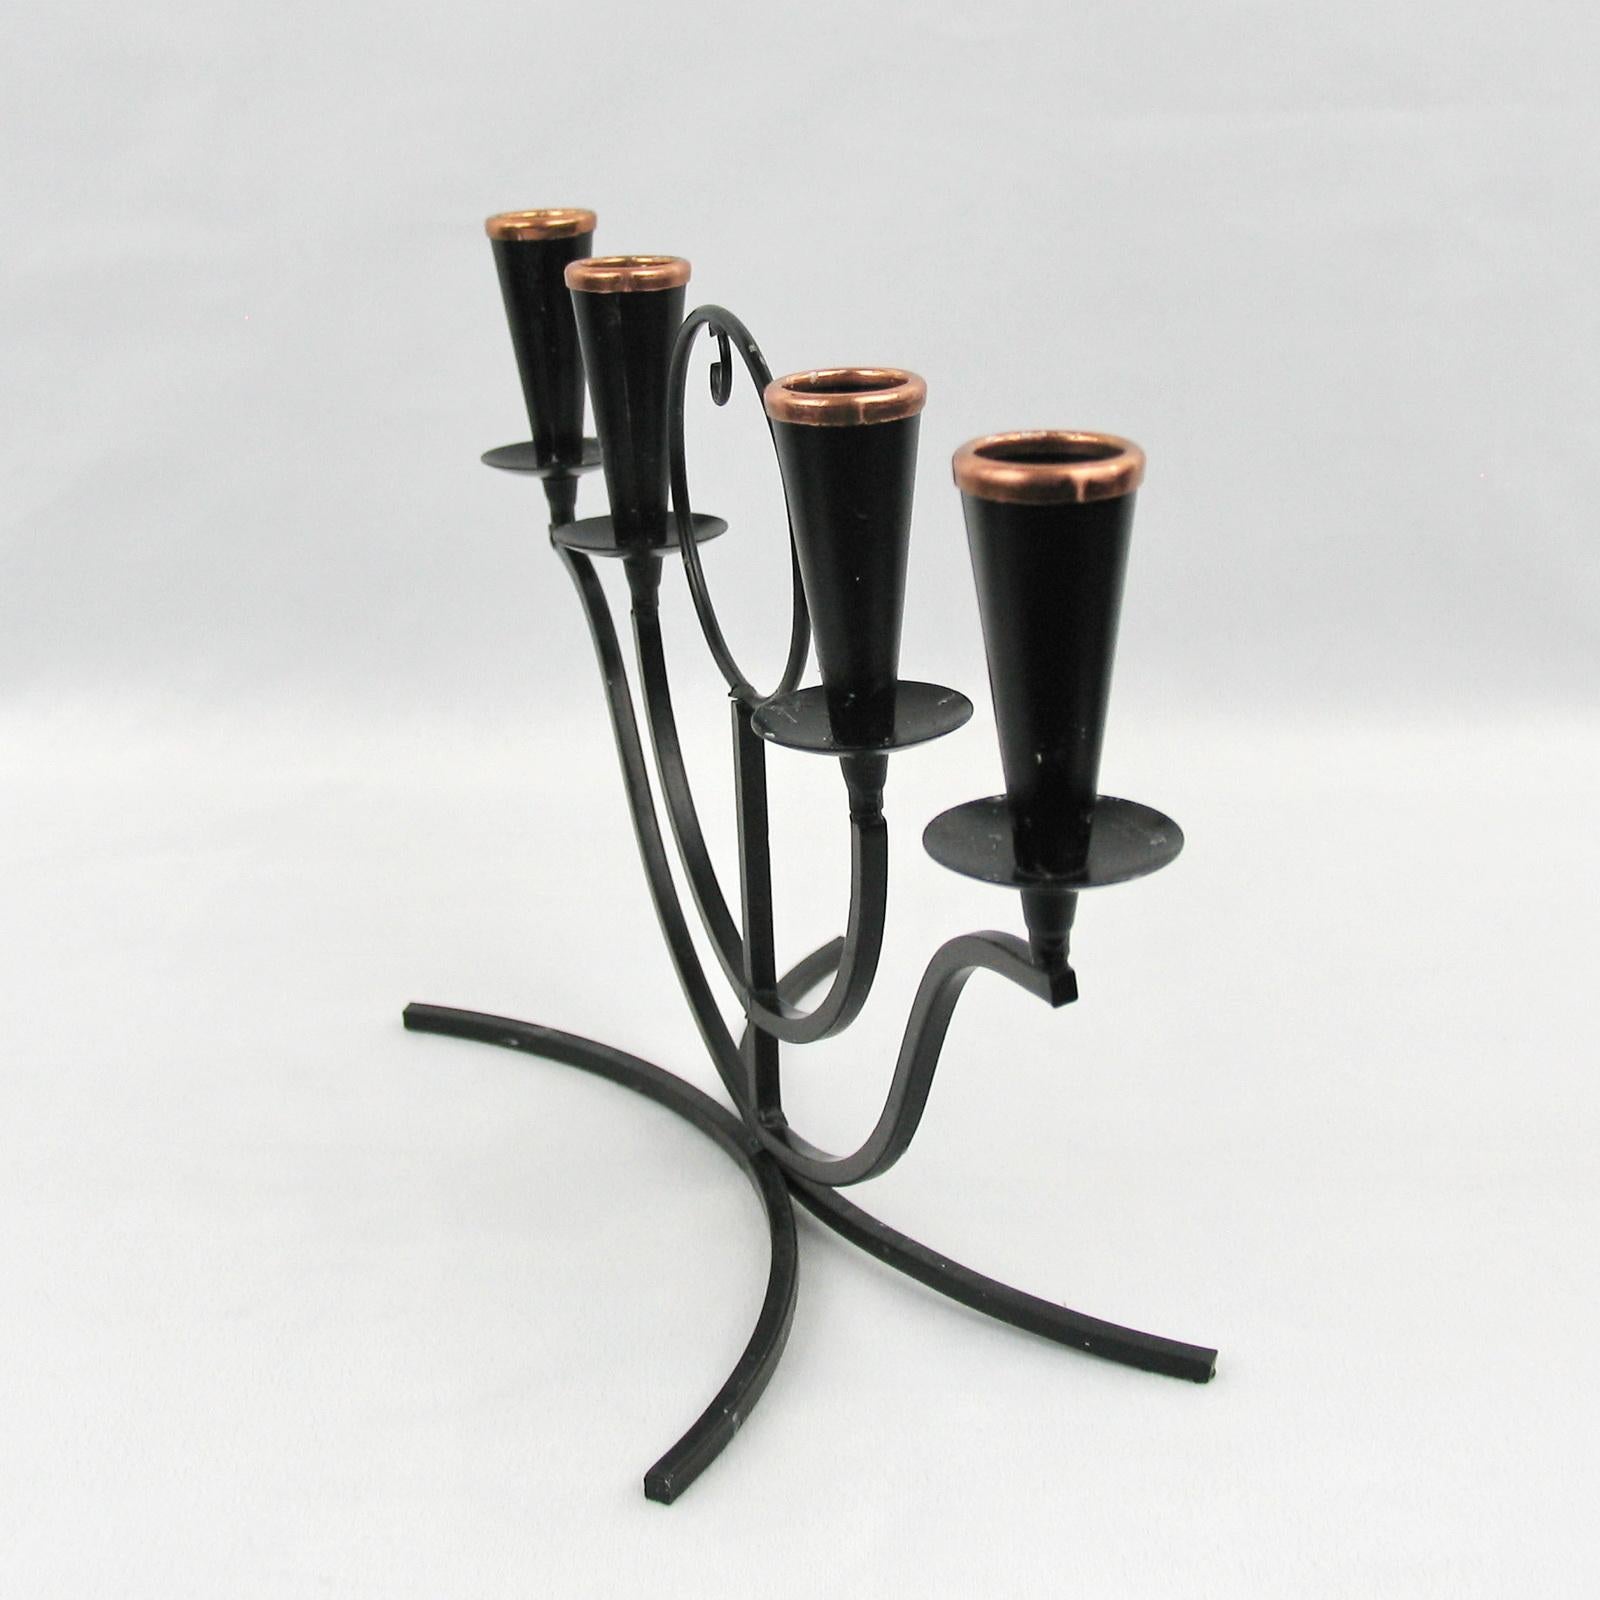 Hand-Painted Scandinavian Mid-Century Gunnar Ander Ystad Metall Candle Holders For Sale